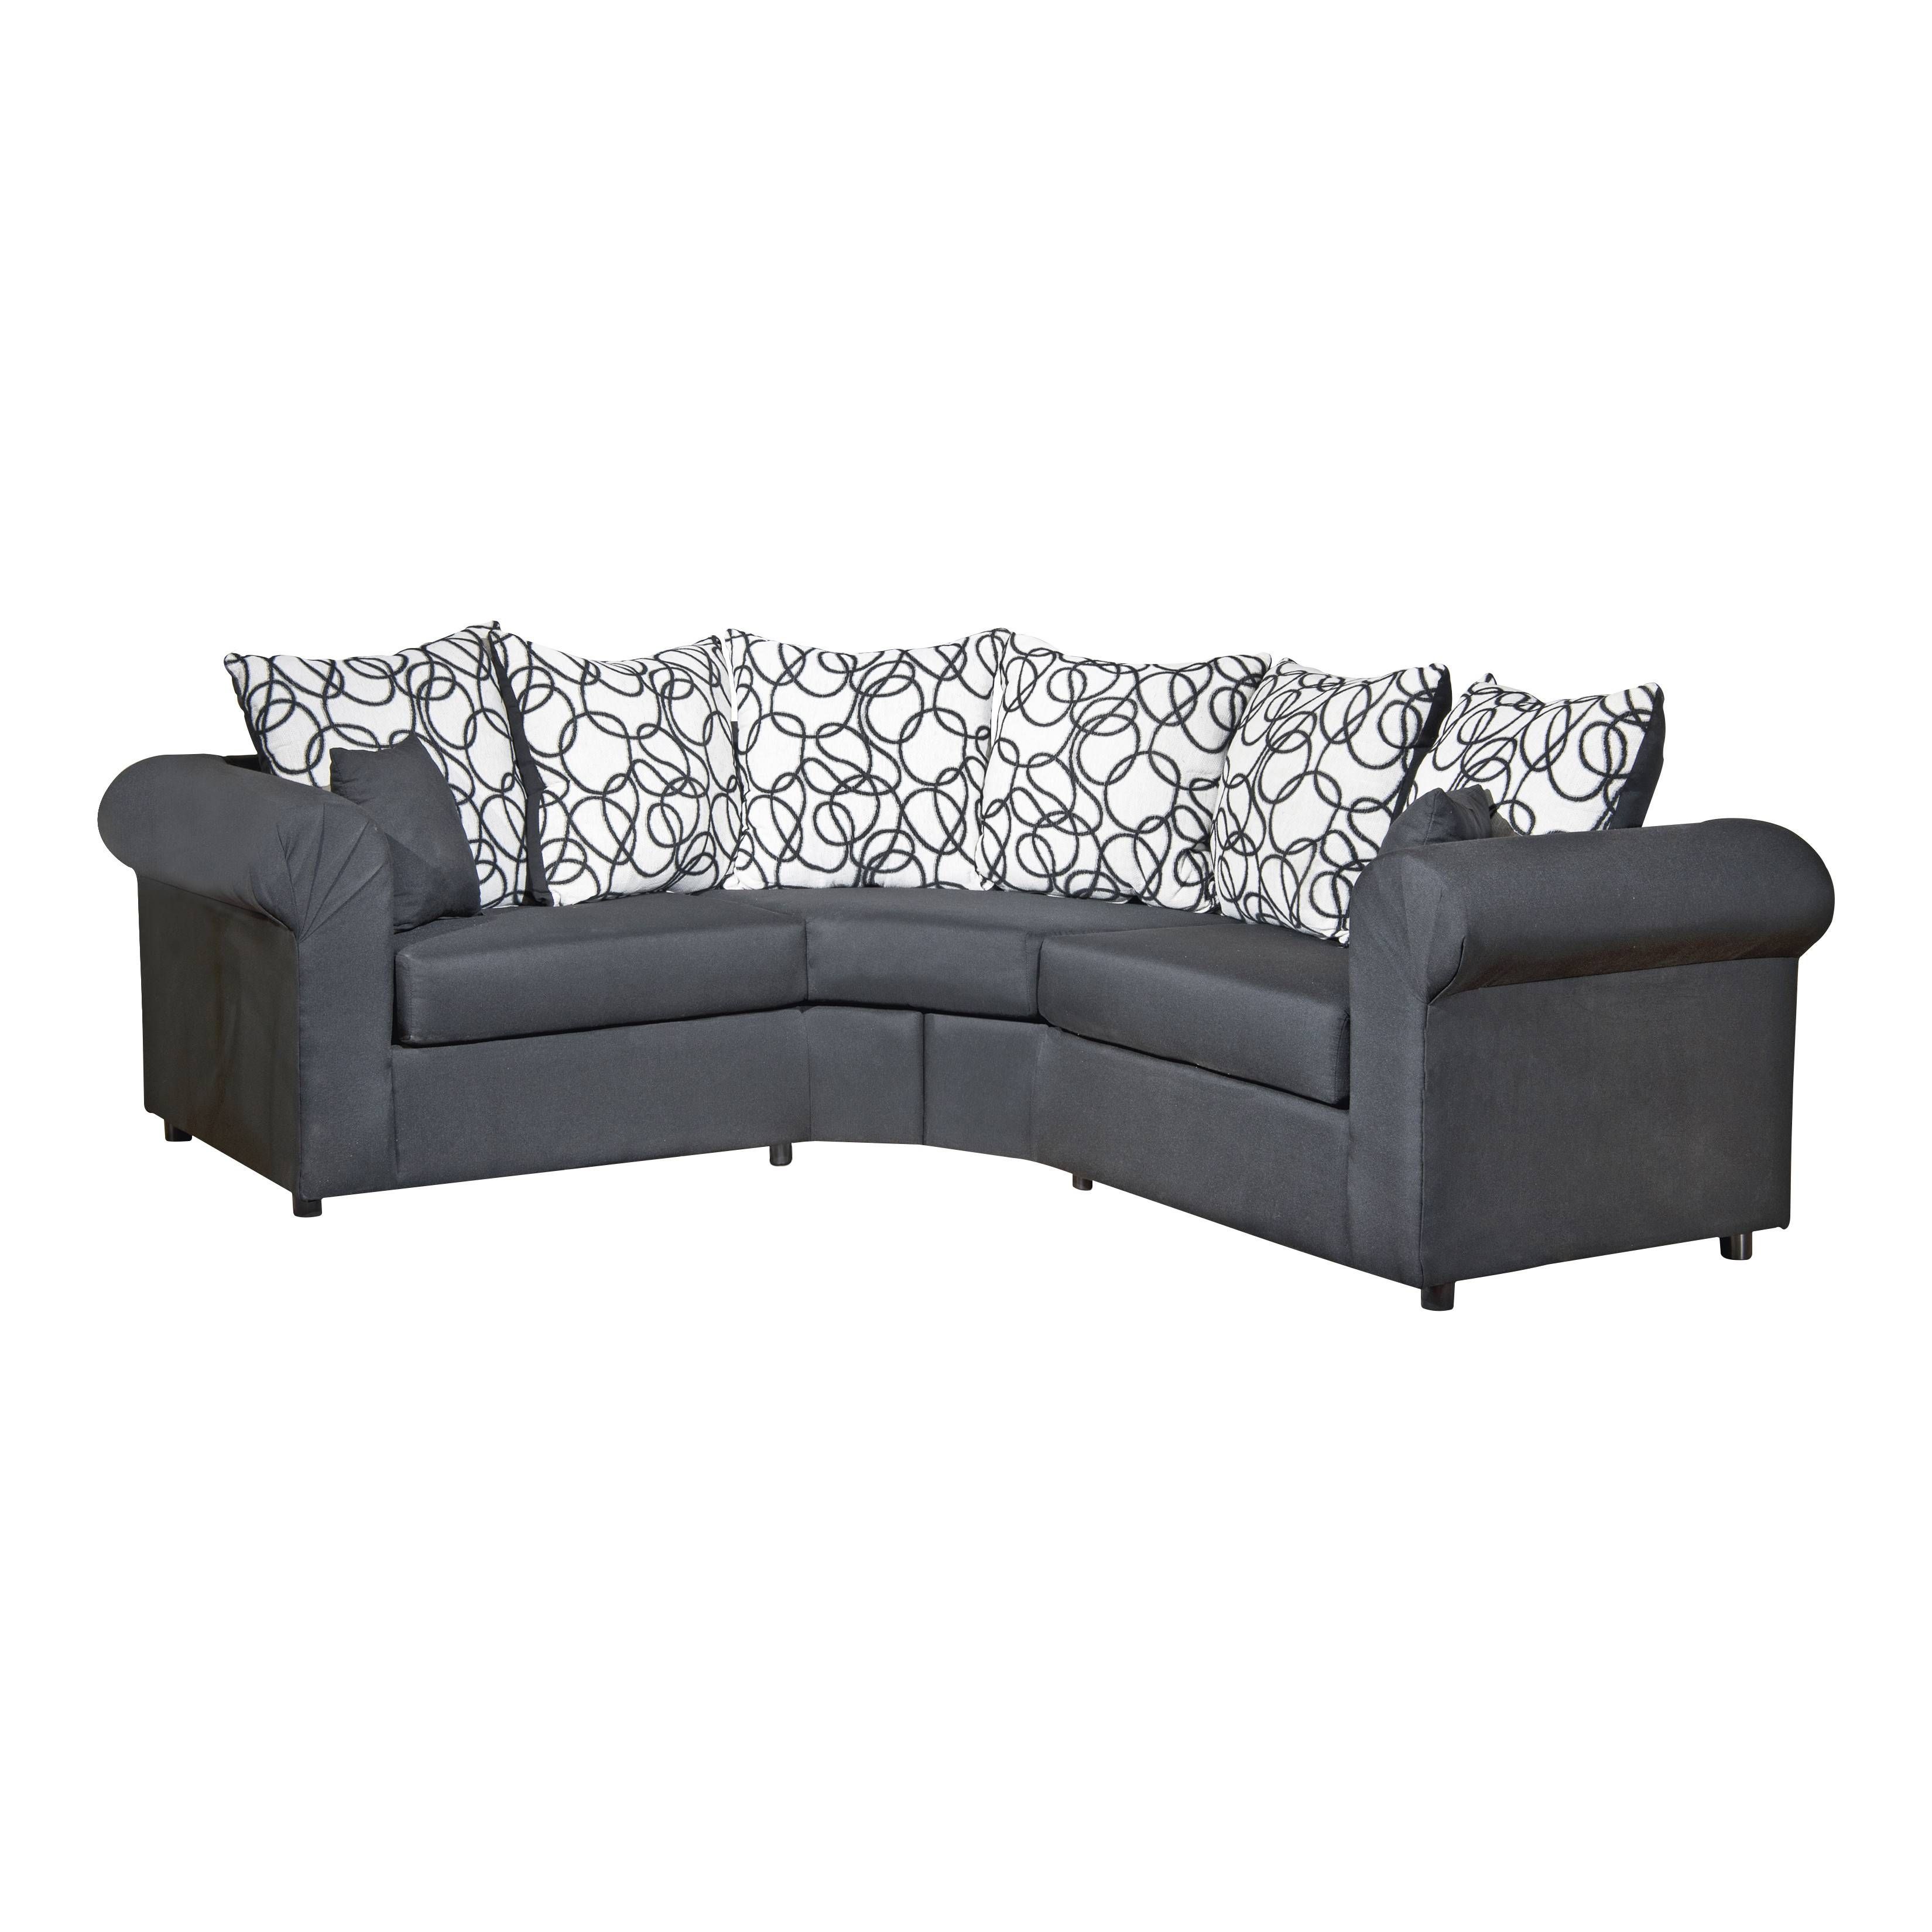 Off White Sectional Sofa (View 16 of 30)